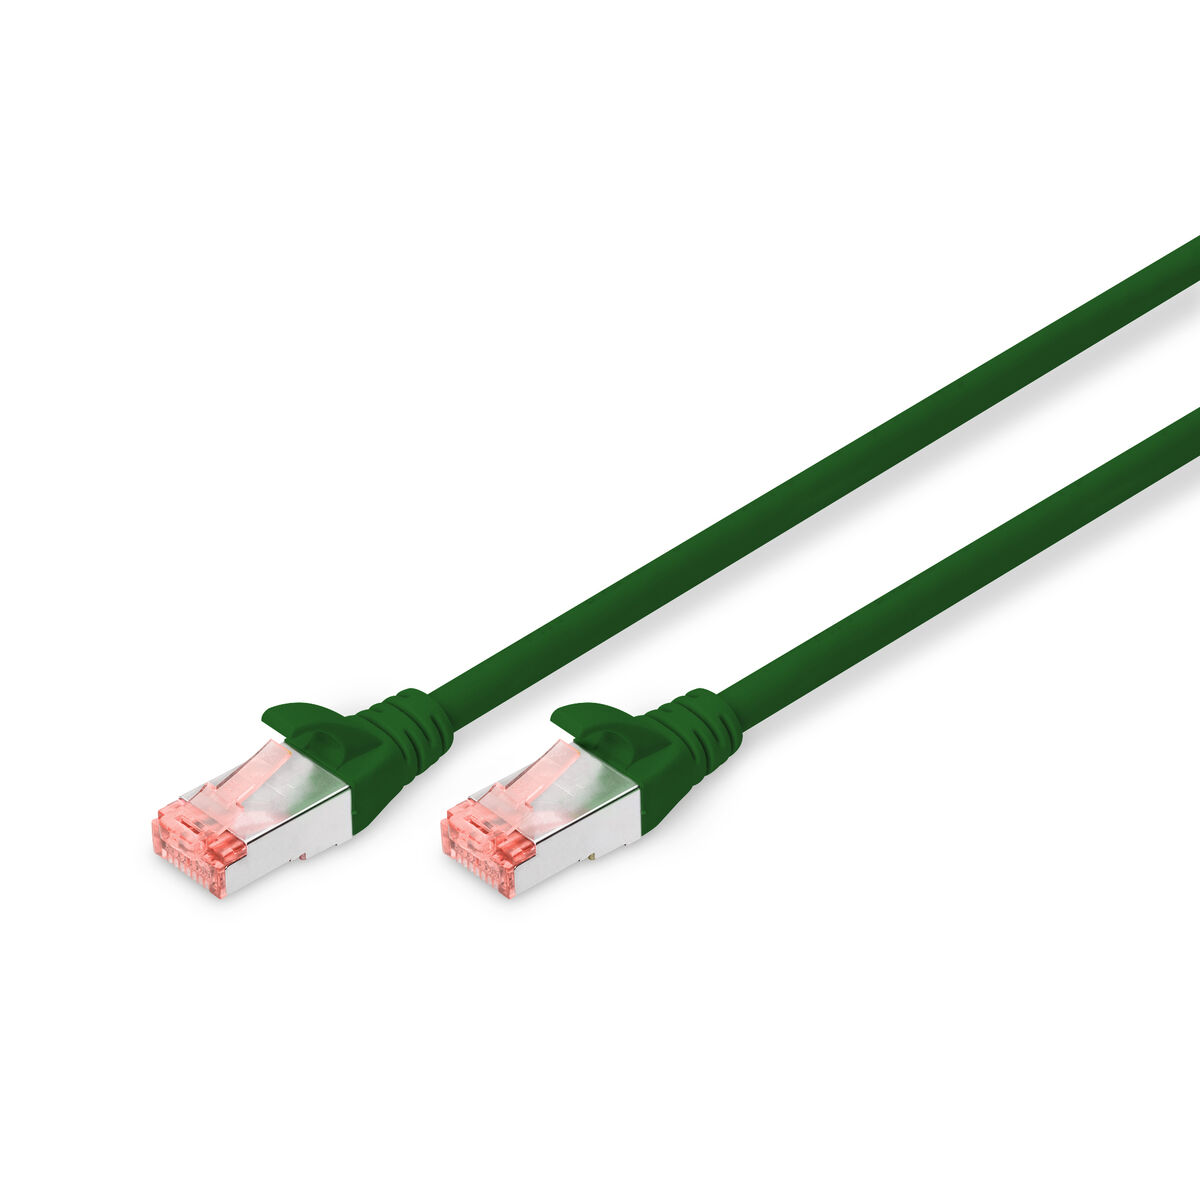 UTP Category 6 Rigid Network Cable Digitus by Assmann DK-1644-030/G 3 m Green